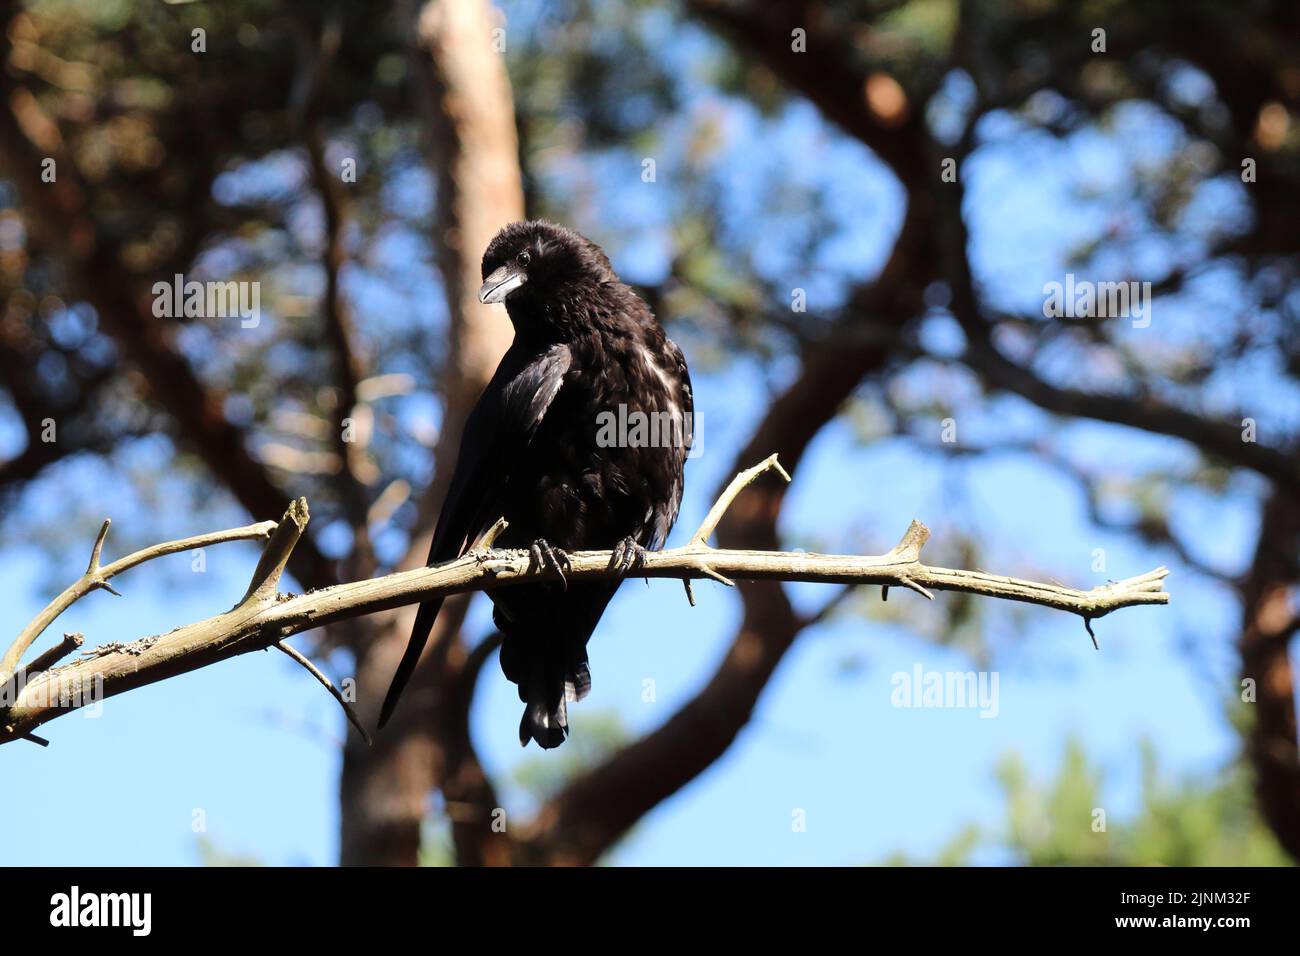 A beautiful image of a crow bird in a tree at the woods, the bird is lazing under the hot sun with their head tilted. The feathers appear wet. Stock Photo